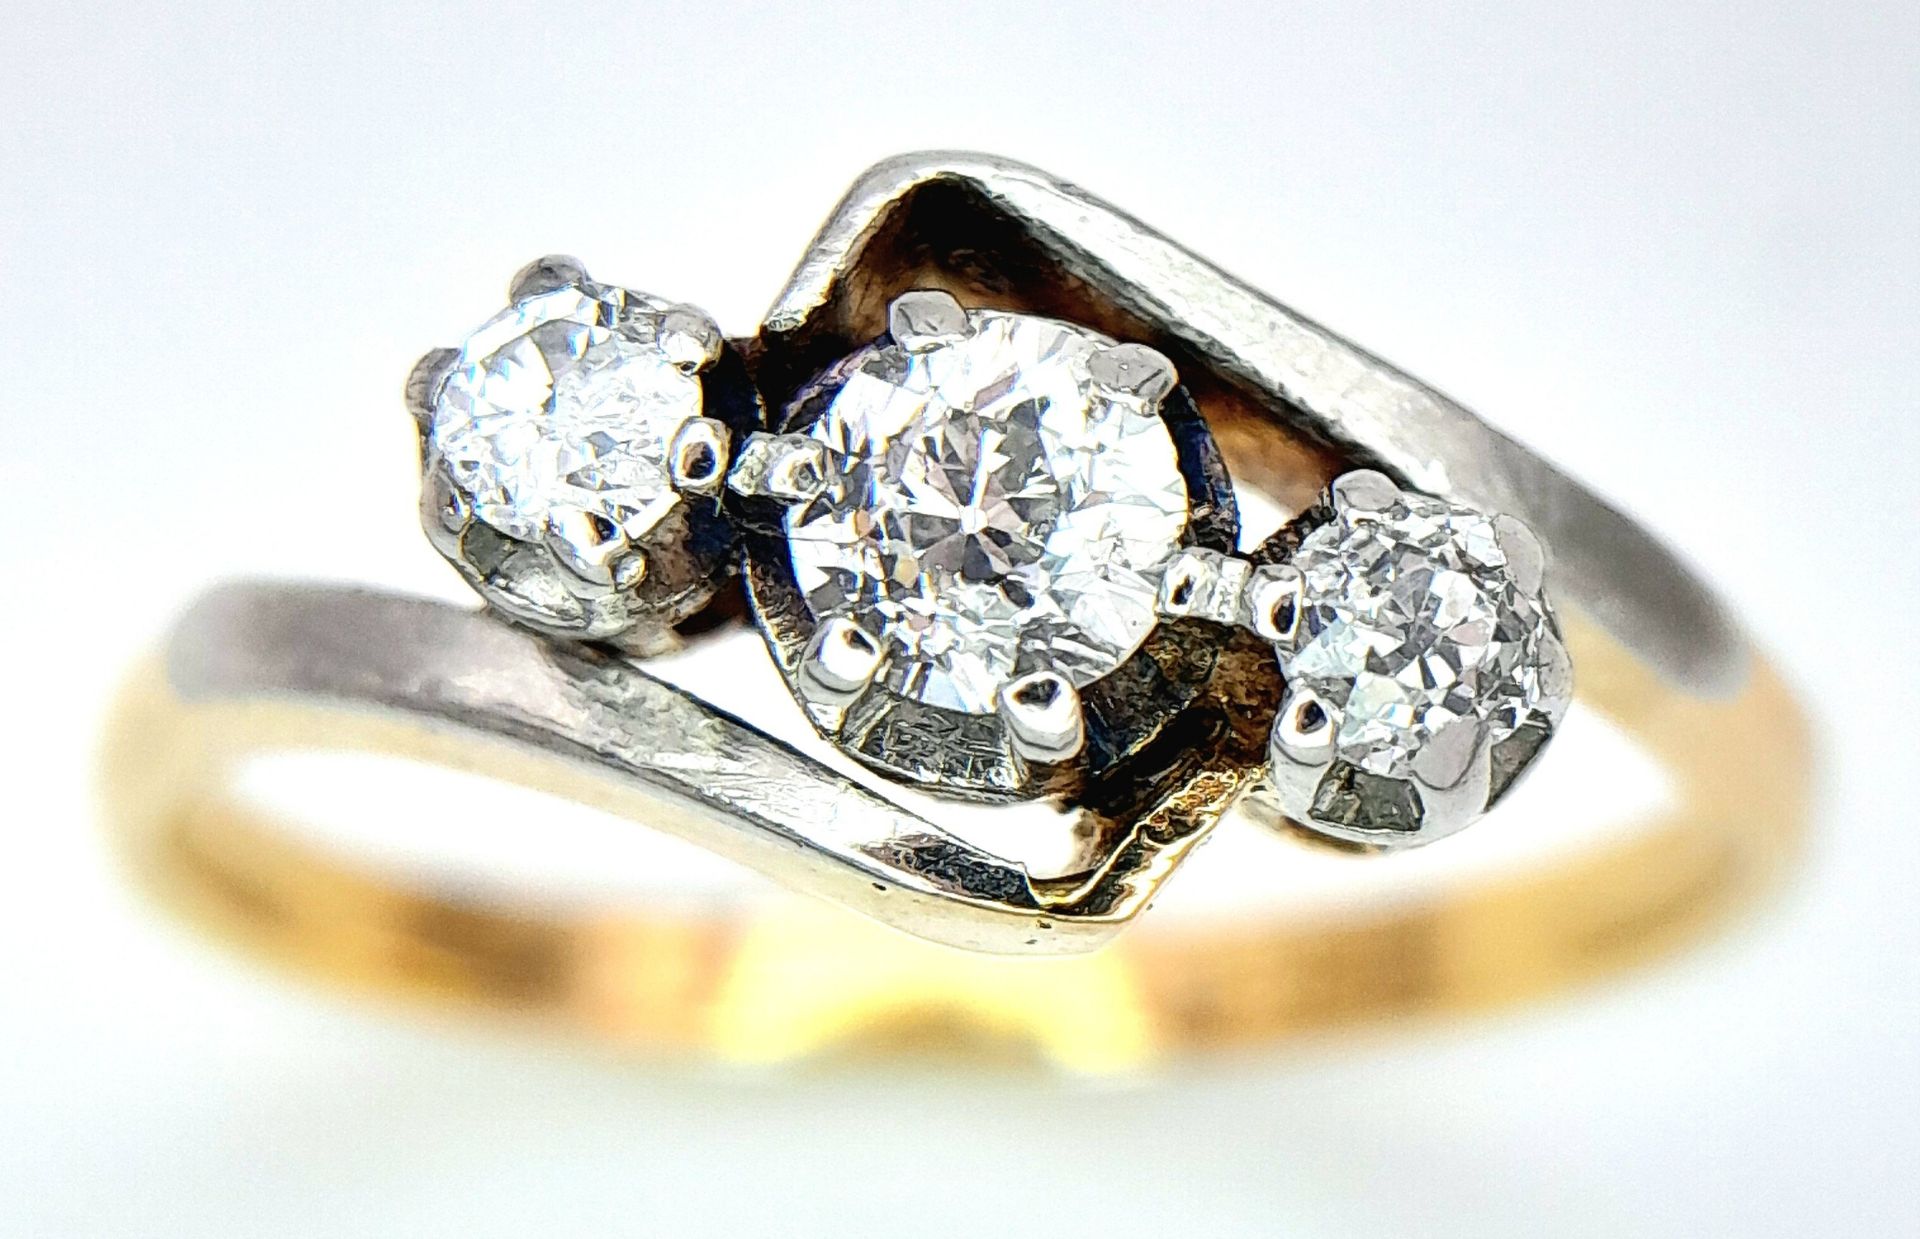 AN 18K YELLOW GOLD, DIAMOND SET, CROSSOVER 3 STONE RING. 0.25CT. 2.8G. SIZE L - Image 4 of 6